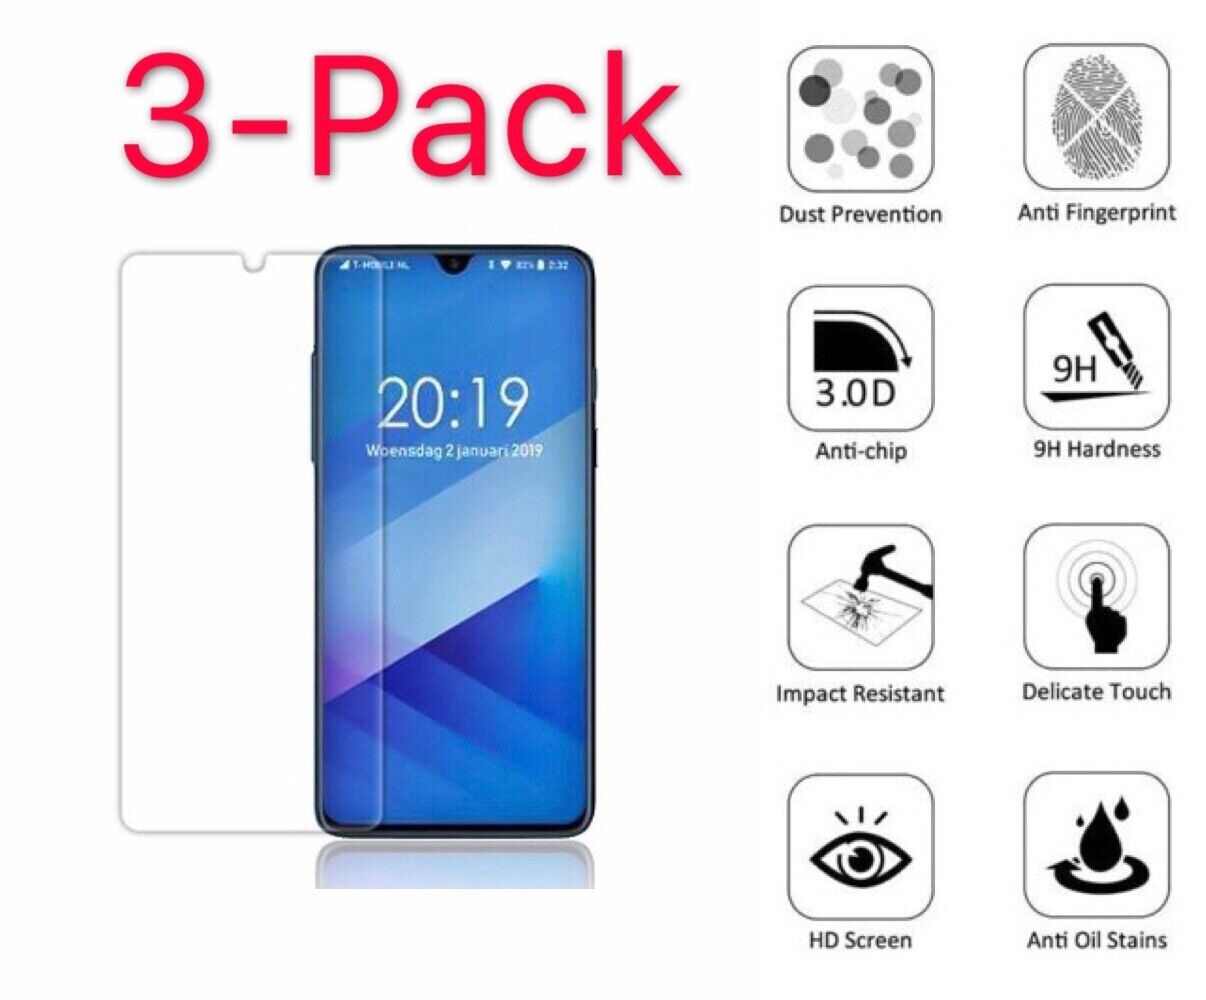 3-Pack Premium Tempered Glass Screen Protector For Samsung Galaxy A20 A30 A50 Unbranded Does Not Apply